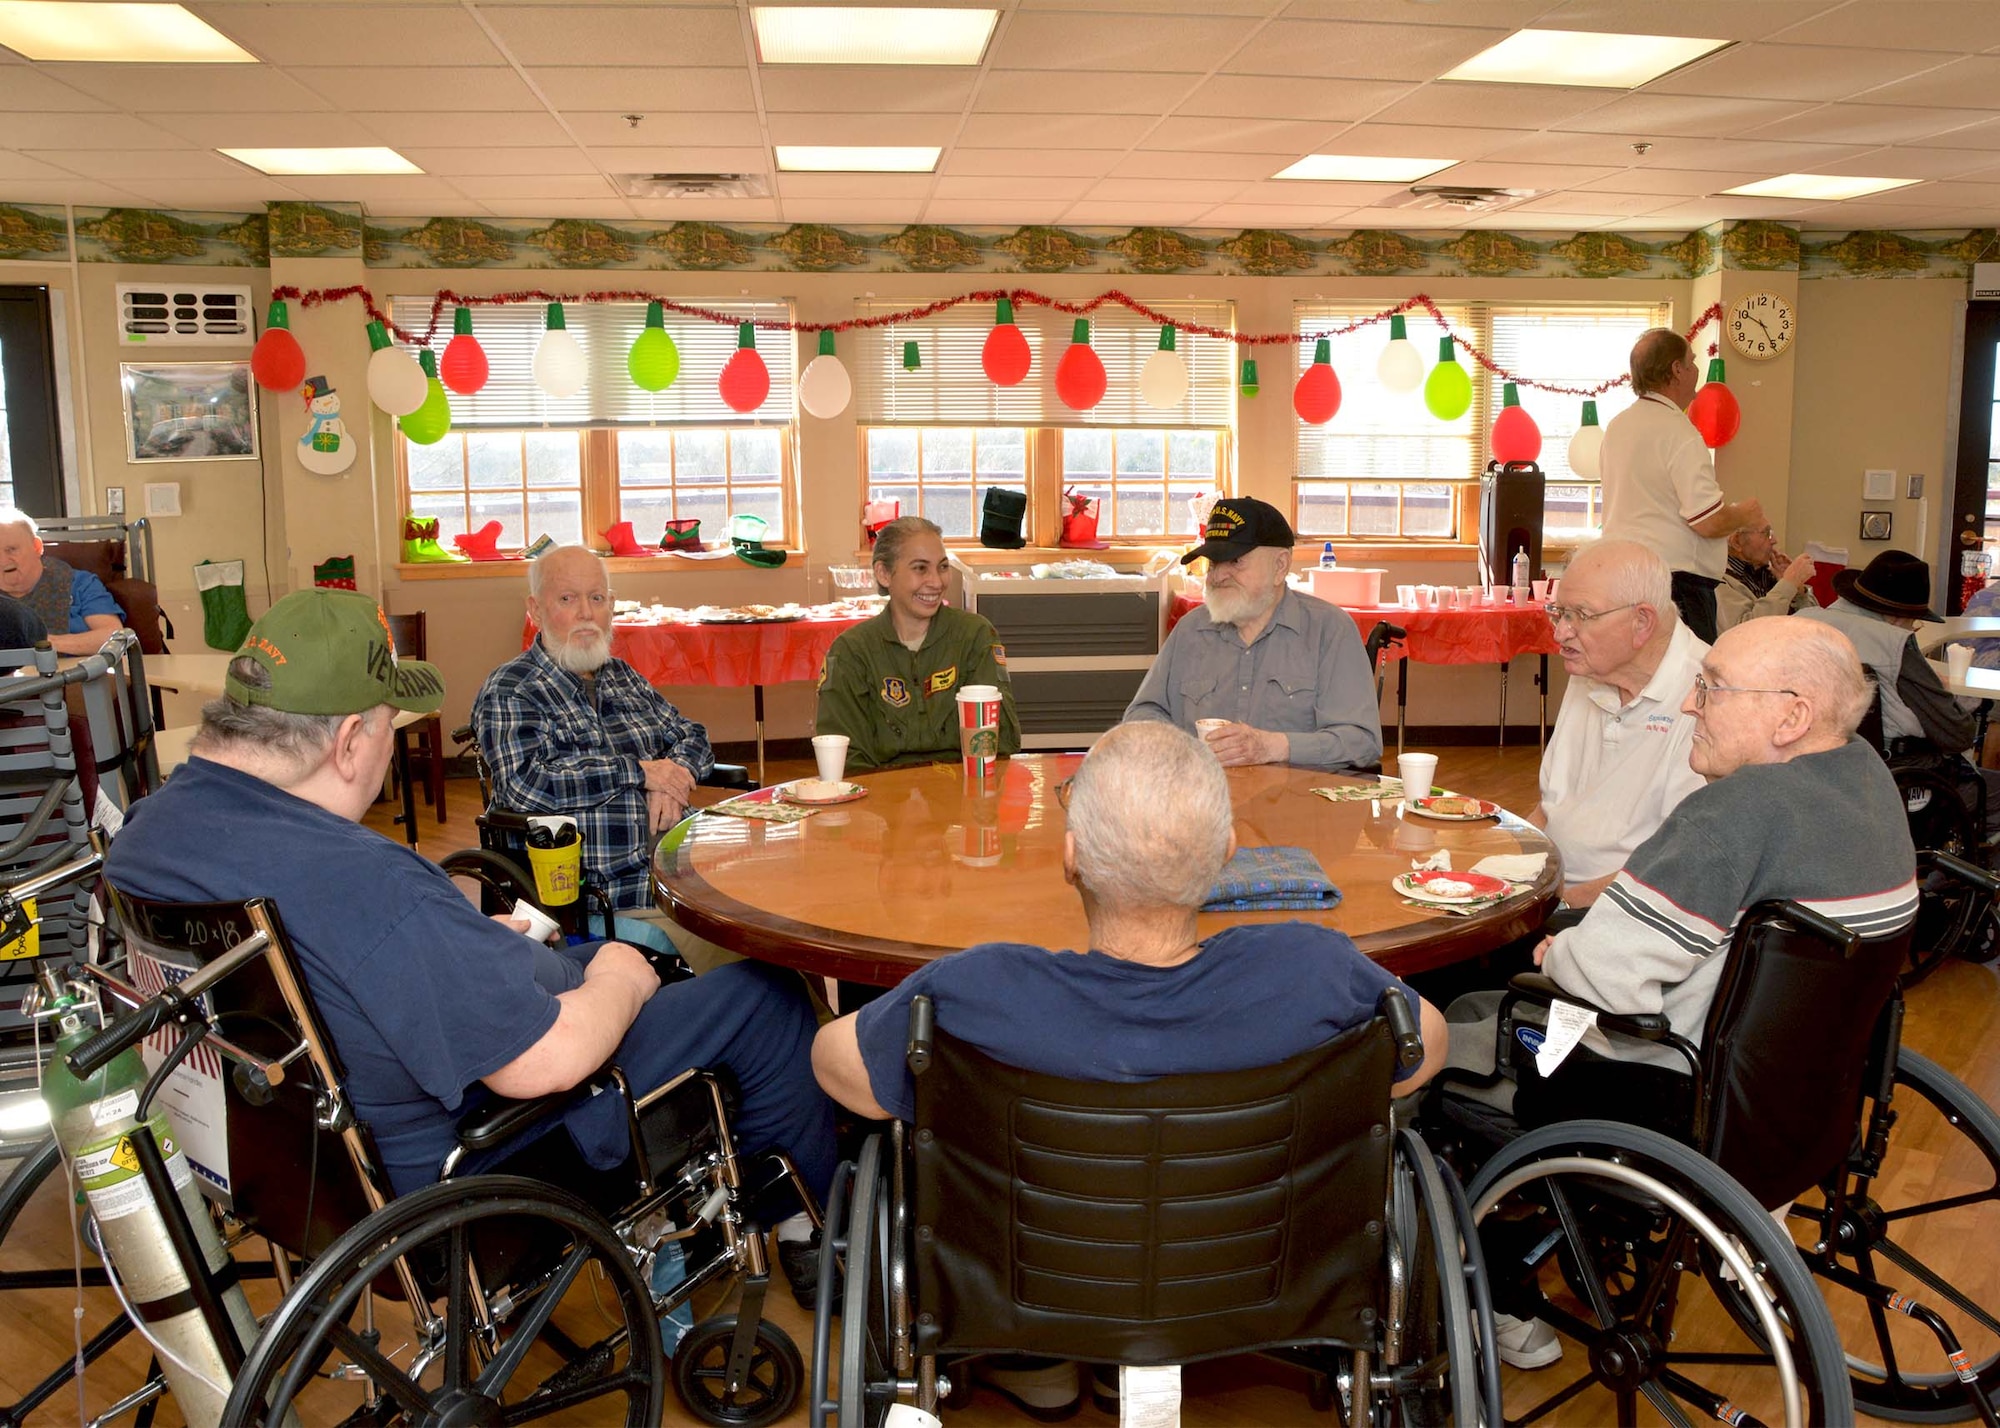 Maj. Donna Williams, 465th Air Refueling Squadron KC-135R pilot, visits with a group of veterans at the Norman Veterans Center Dec. 20, 2018, in Norman, Oklahoma. 507th Air Refueling Wing Airmen visited the veterans to deliver gifts and serve snacks for the holidays. (U.S. Air Force photo by Tech. Sgt. Samantha Mathison)